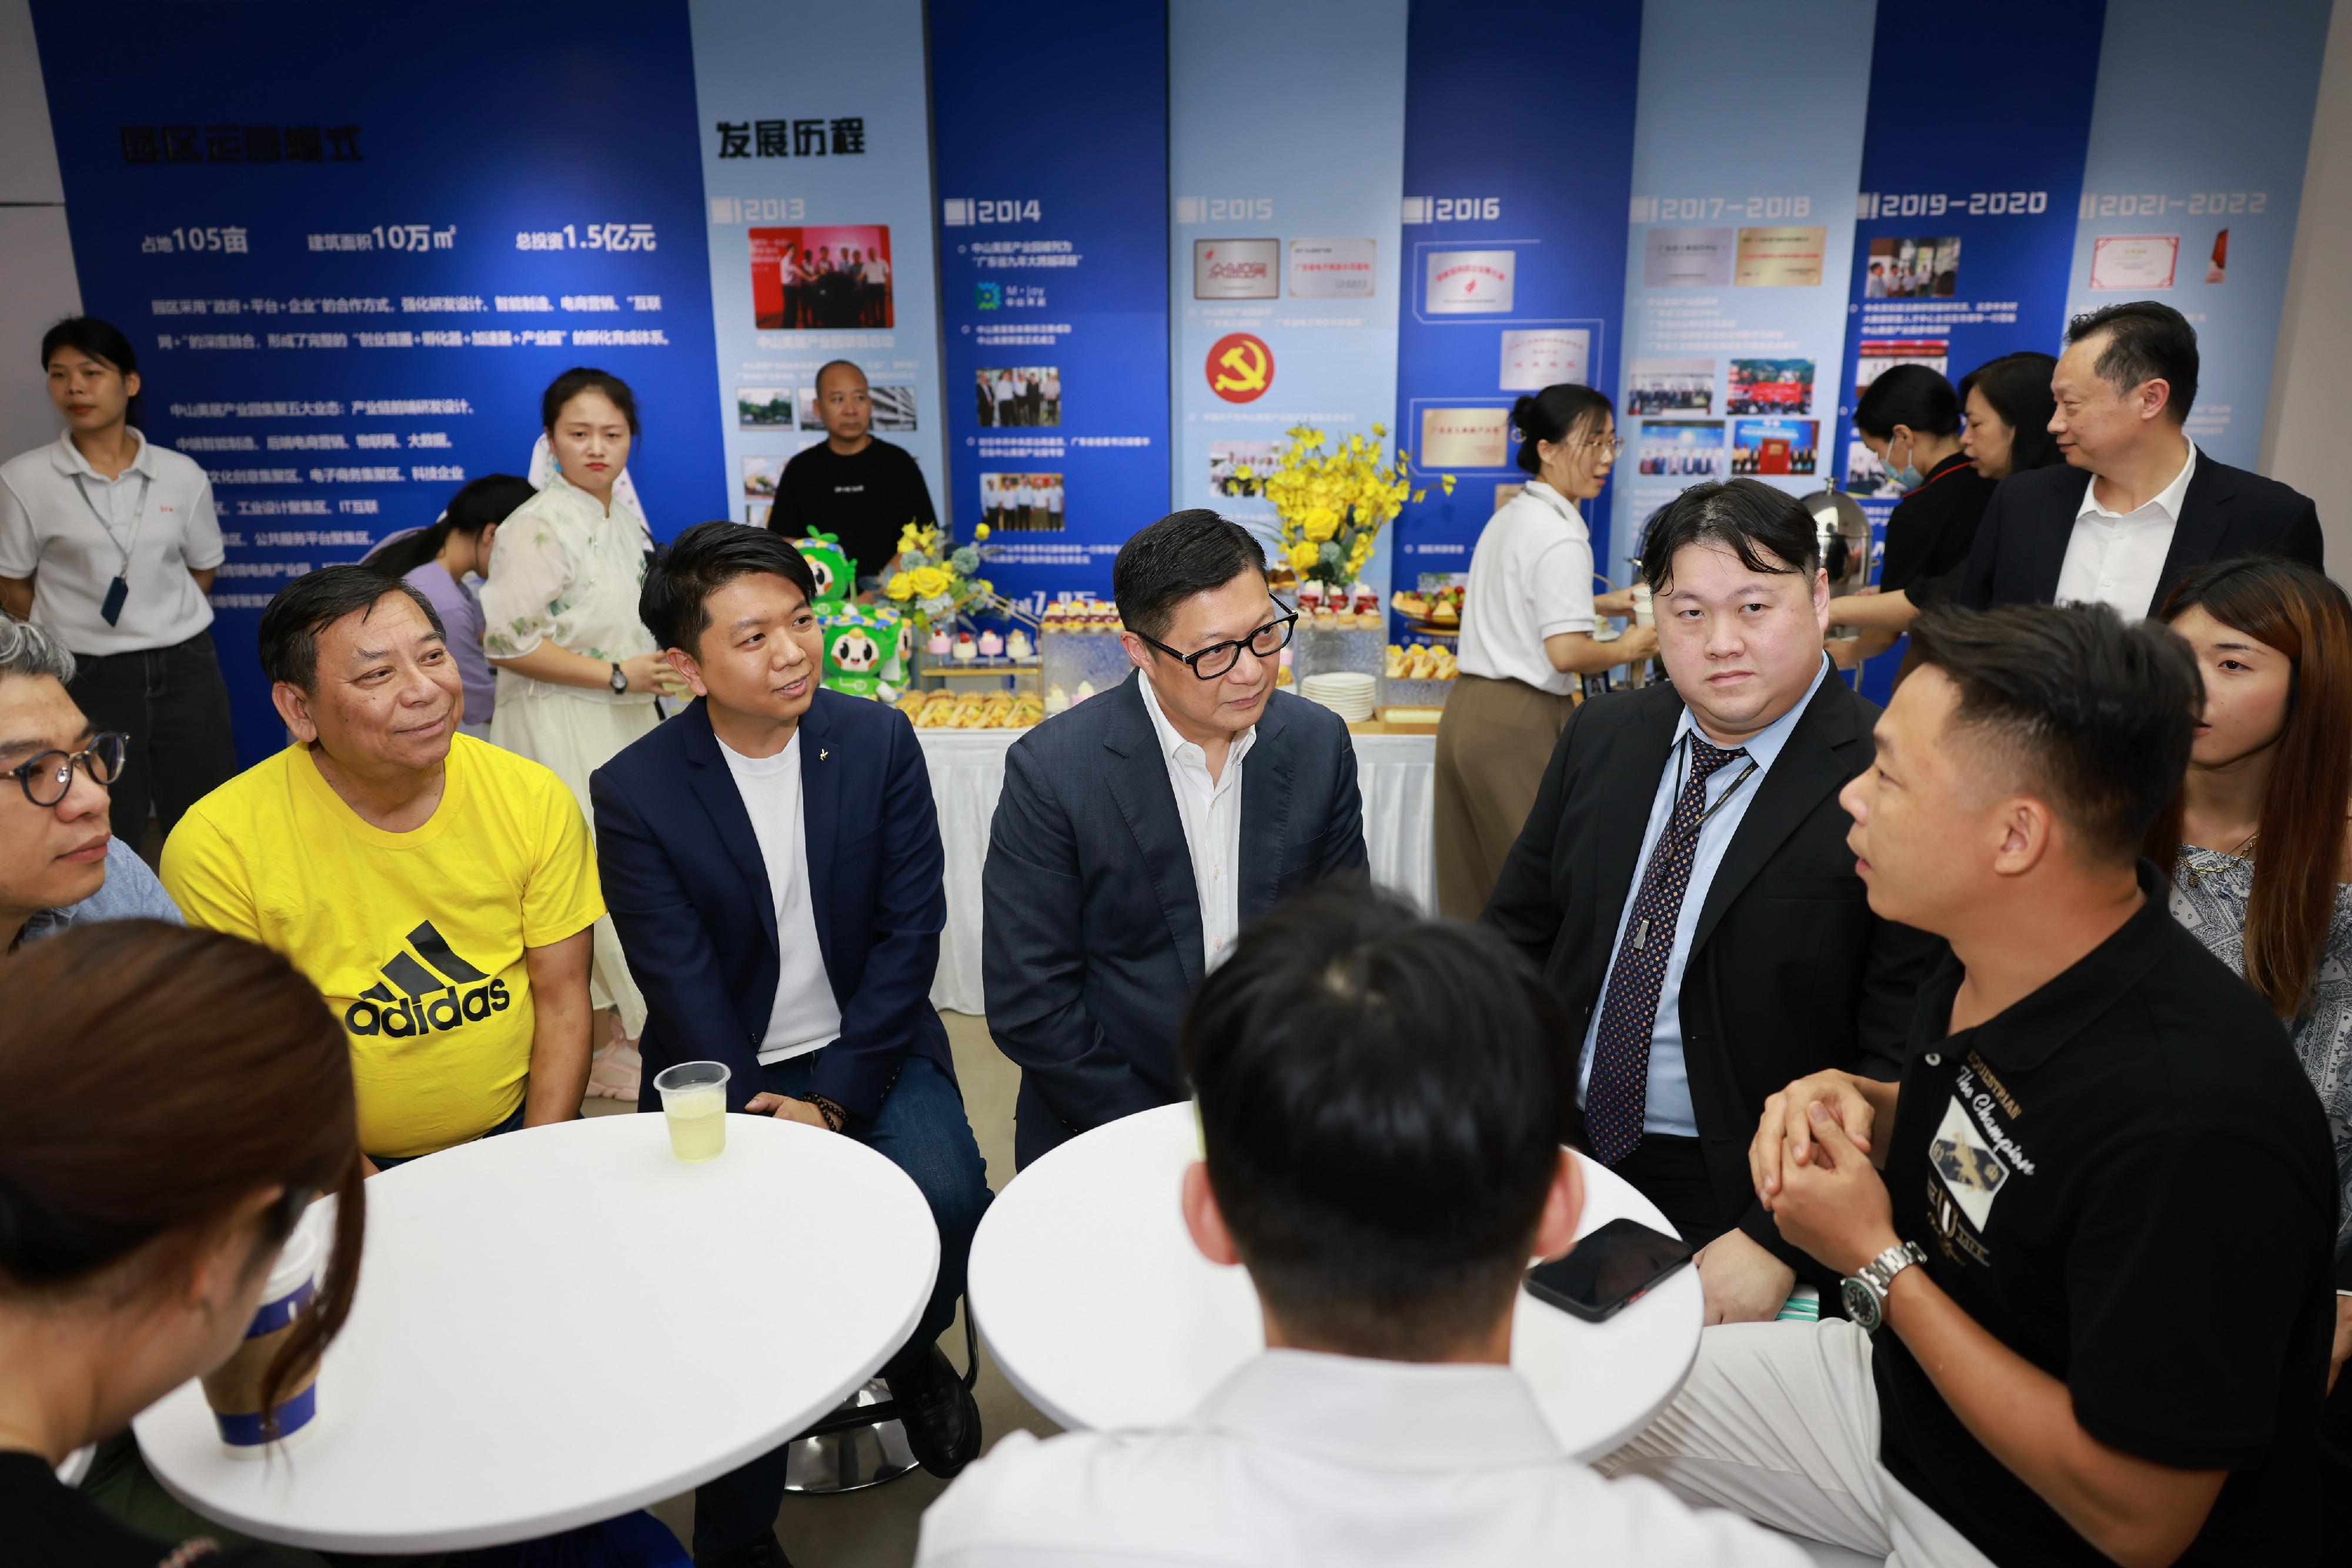 The Secretary for Security, Mr Tang Ping-keung, today (July 20) completed his series of visits to all cities of the Guangdong-Hong Kong-Macao Greater Bay Area (GBA) in recent months. Photo shows Mr Tang (centre) chatting and exchanging views with young Hong Kong entrepreneurs at the e-Park (Zhongshan), and exploring how the Hong Kong Special Administrative Region Government could help their development in the GBA.